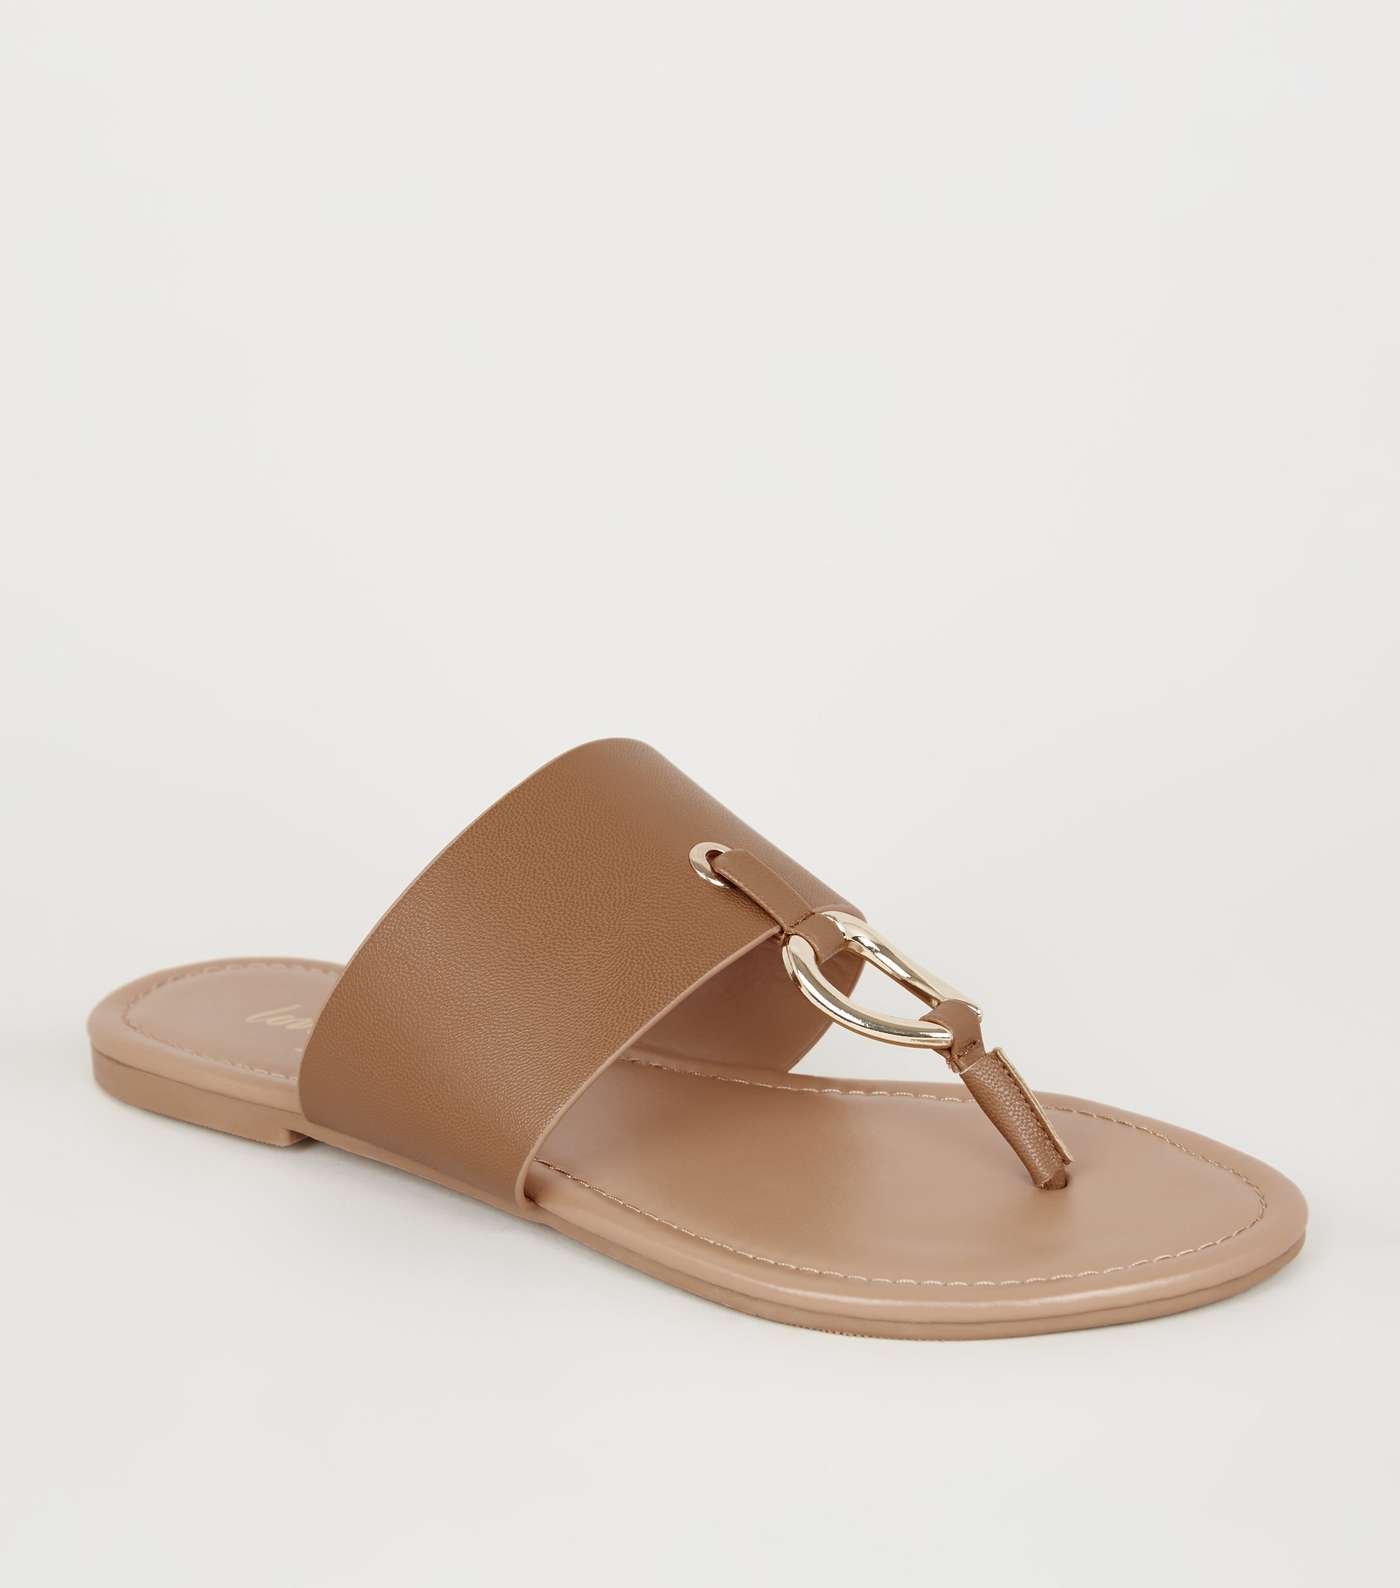 Tan Leather-Look Ring Strap Sandals